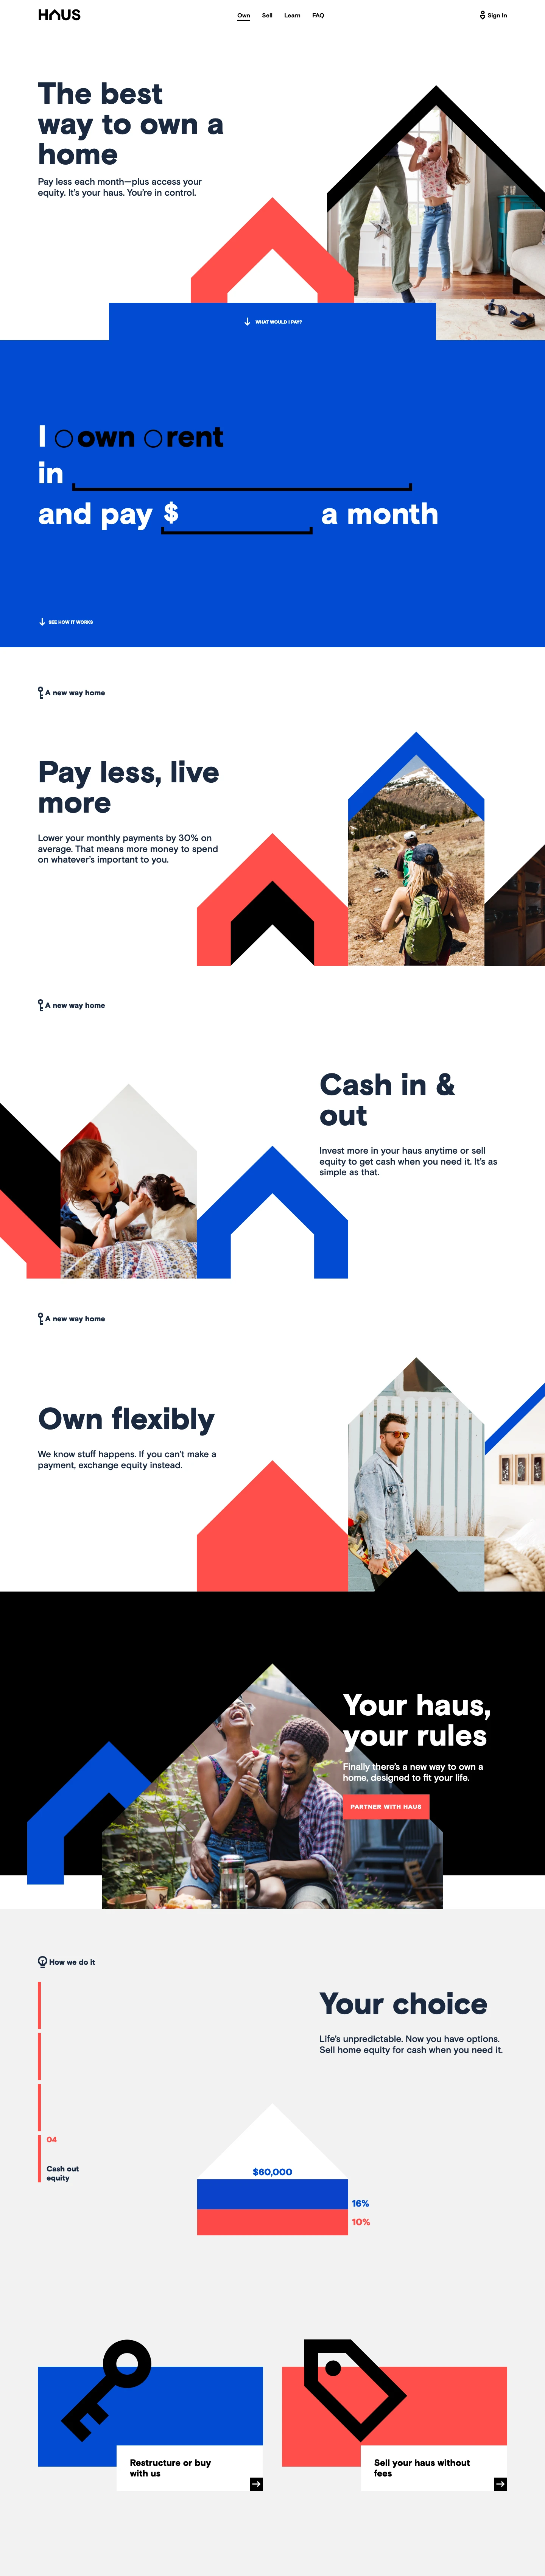 Haus Landing Page Example: The best way to own a home. Pay less each month—plus access your equity. It’s your haus. You’re in control.